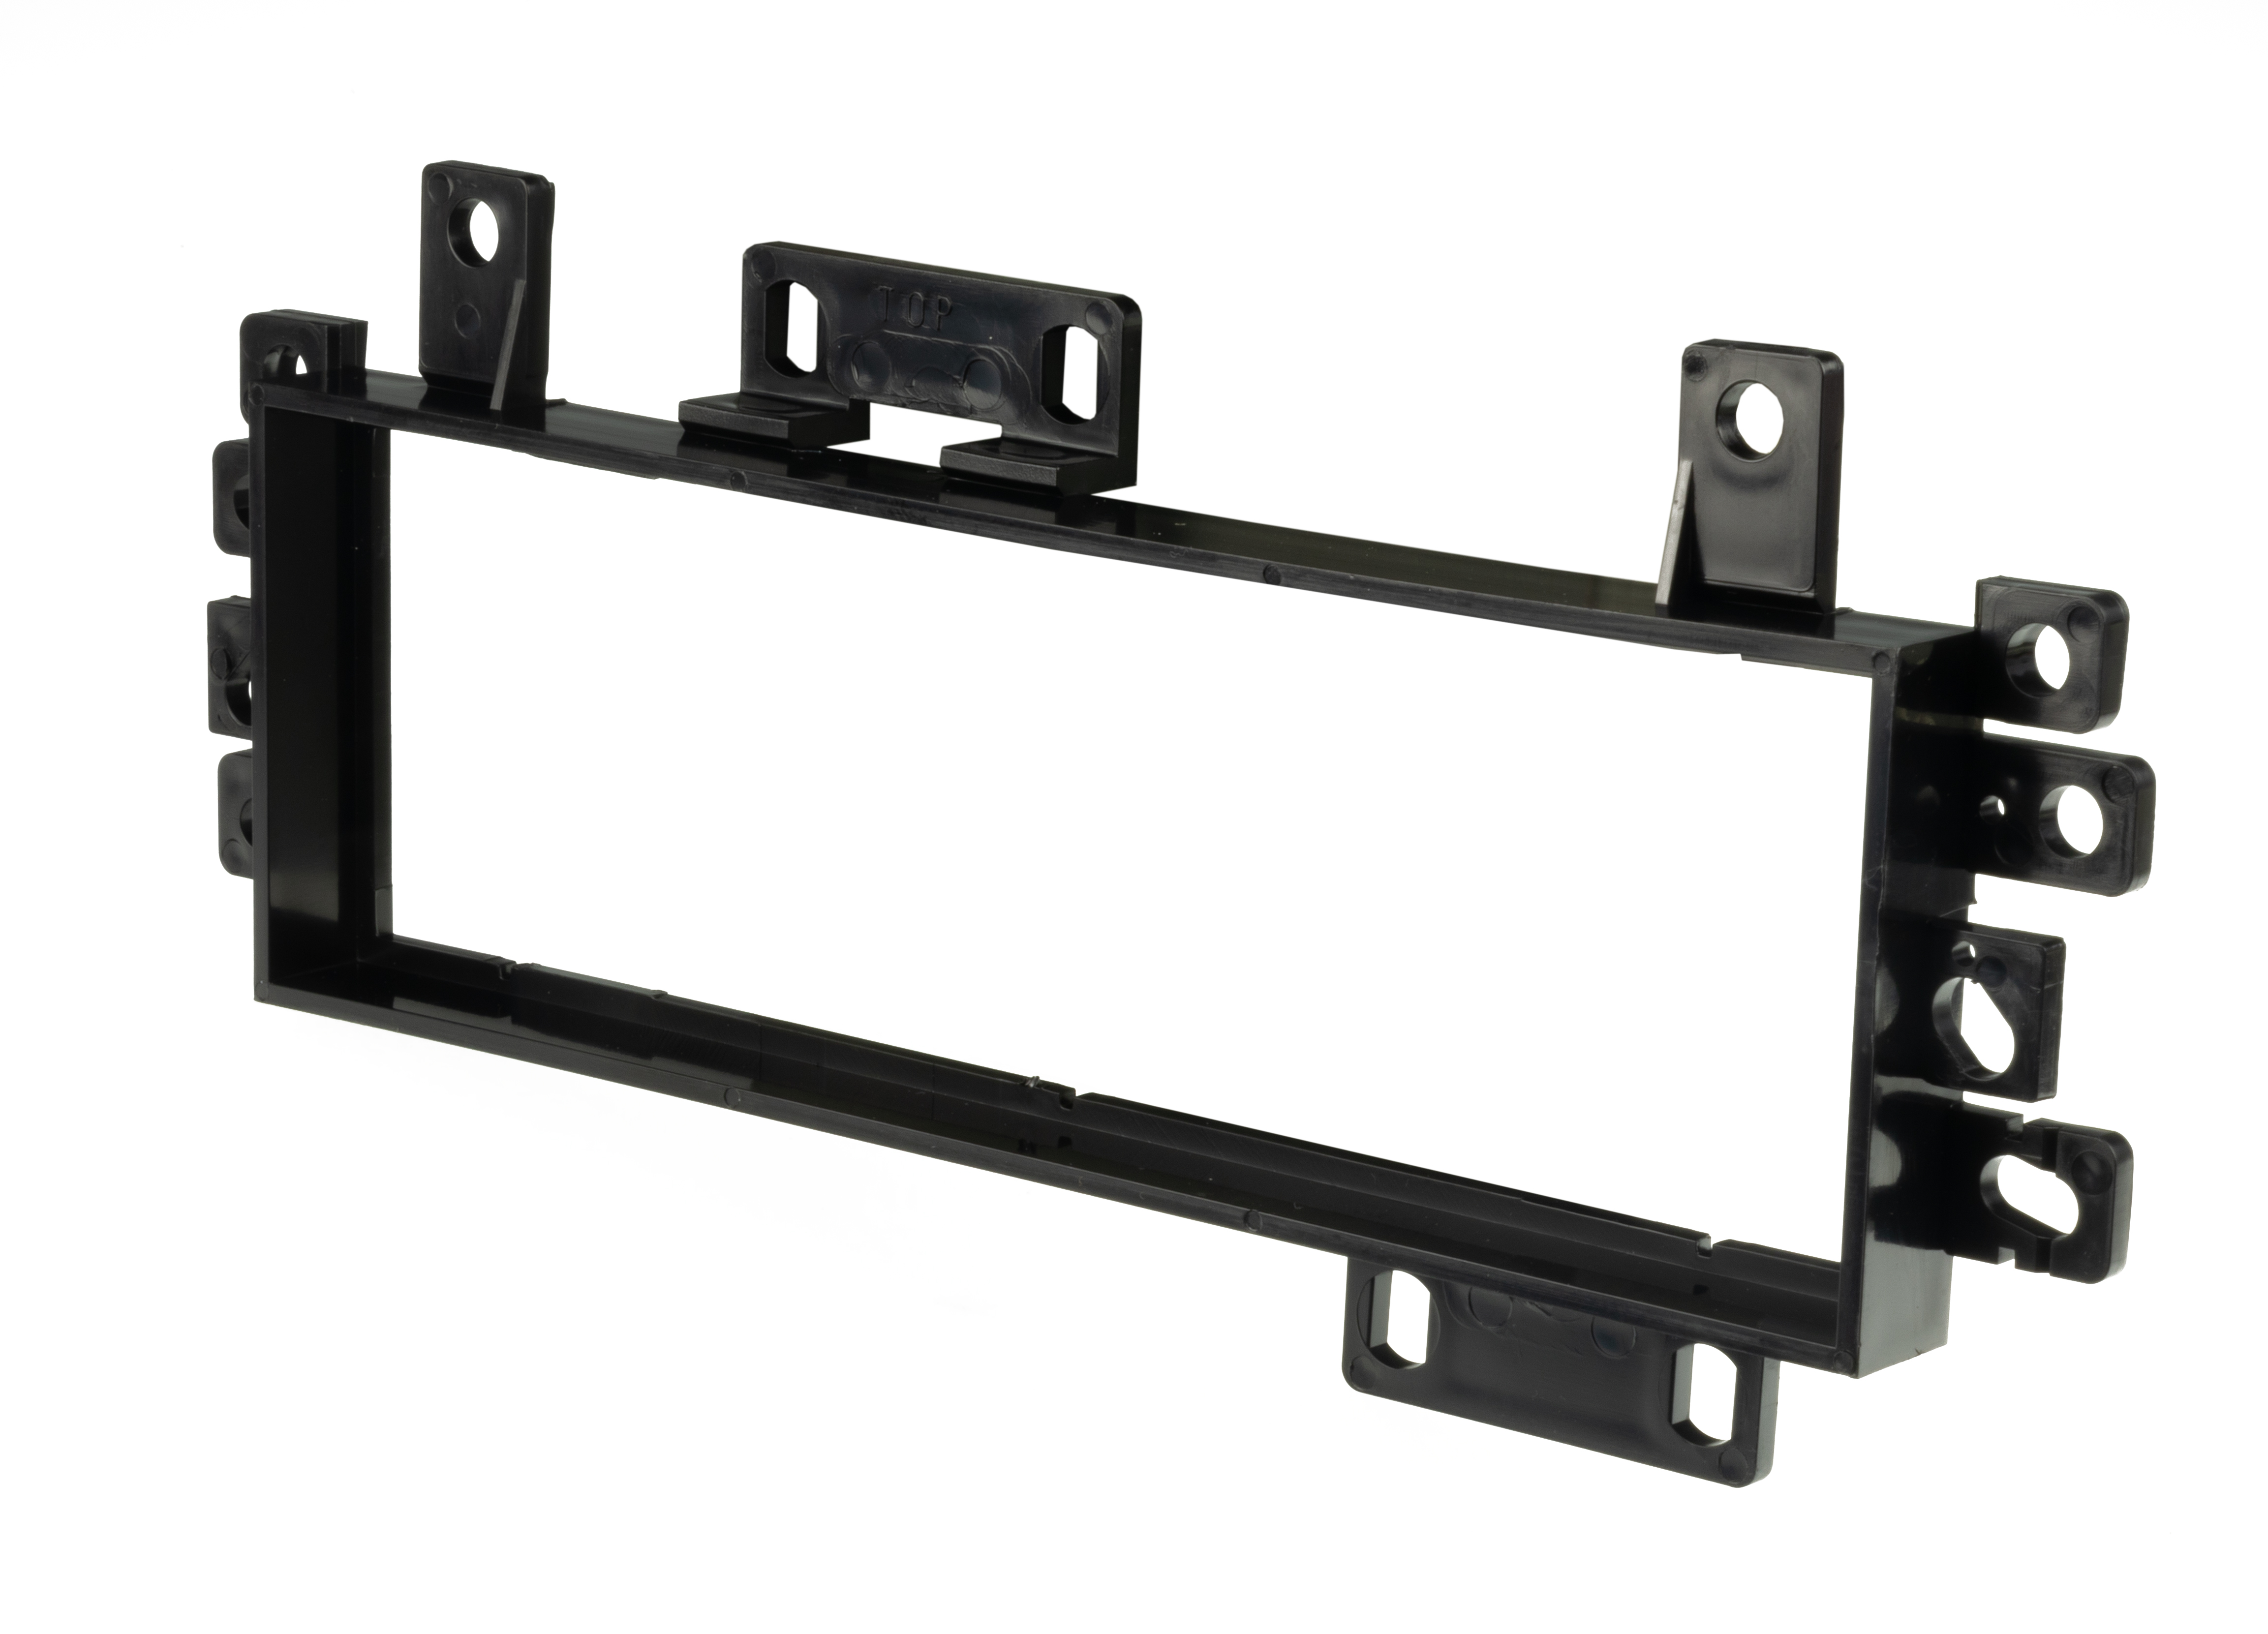 Scosche FCJ2076-WM1 Single DIN Stereo in-Dash Install Kit Comp w/ 1974-01 Ford/Chrysler/Jeep Black New - image 4 of 12